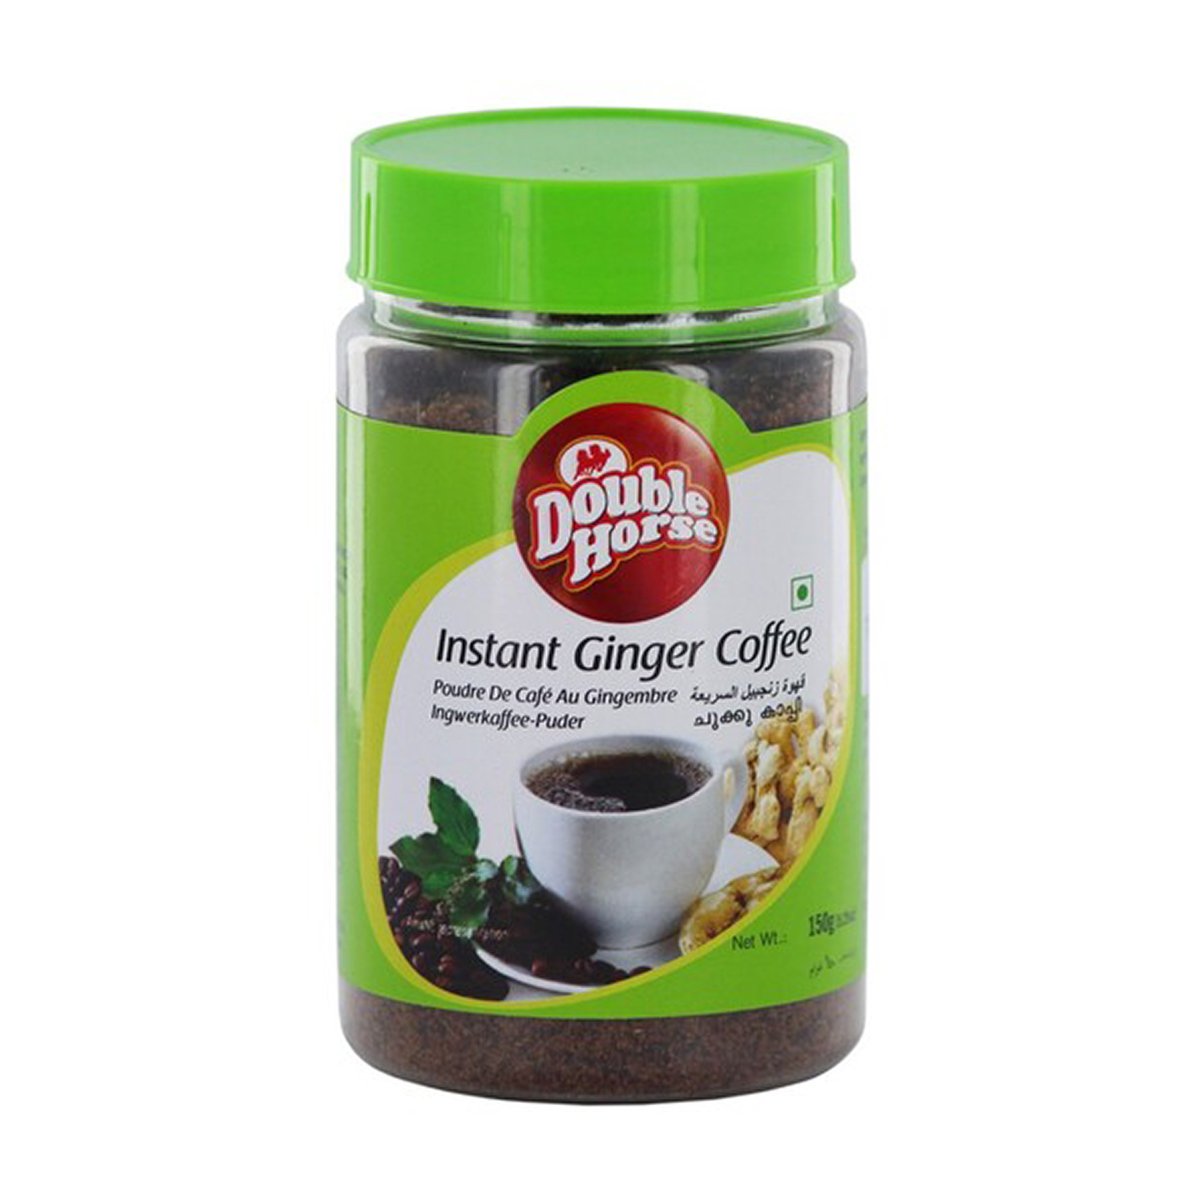 Double Horse Instant Ginger Coffee 150 g